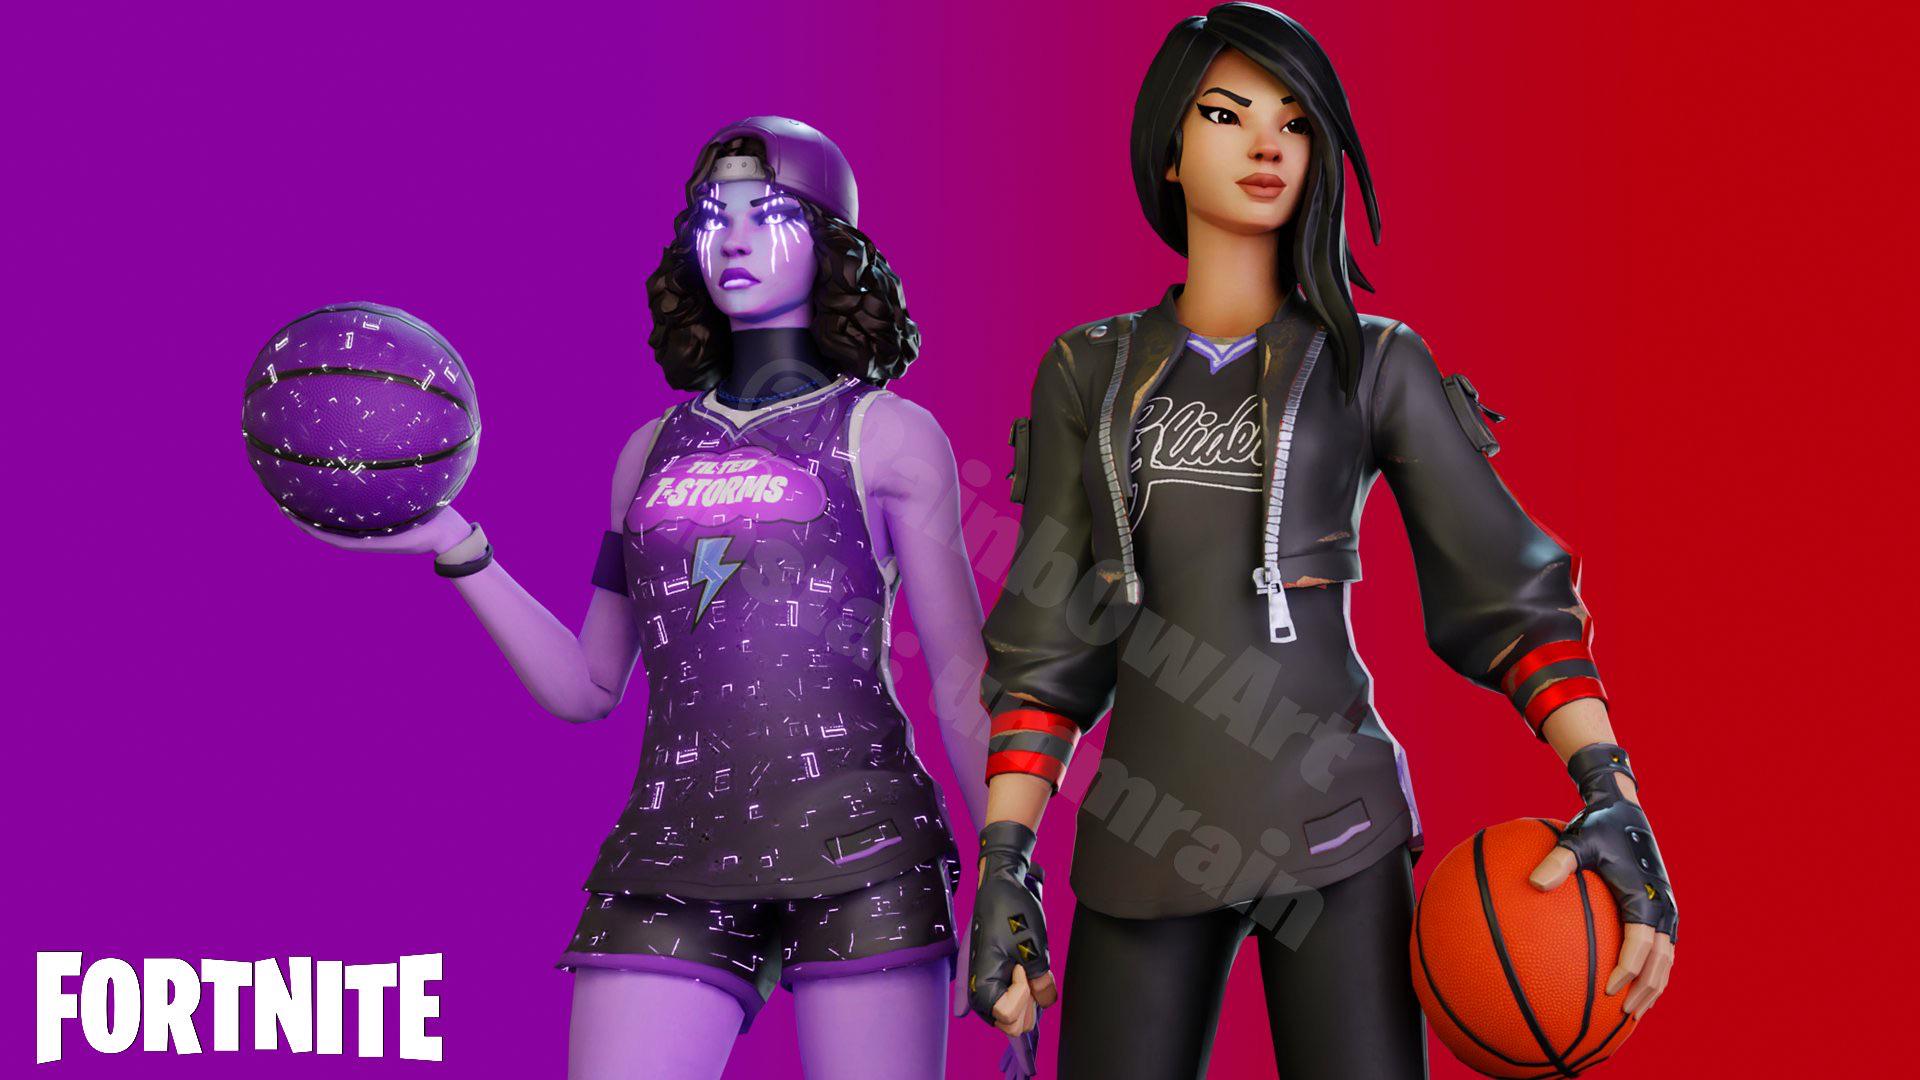 As I was making my weekly recolors, I decided to make a “new” version of Triple Threat. Say hello to Dark Triple Threat and Point Guard!